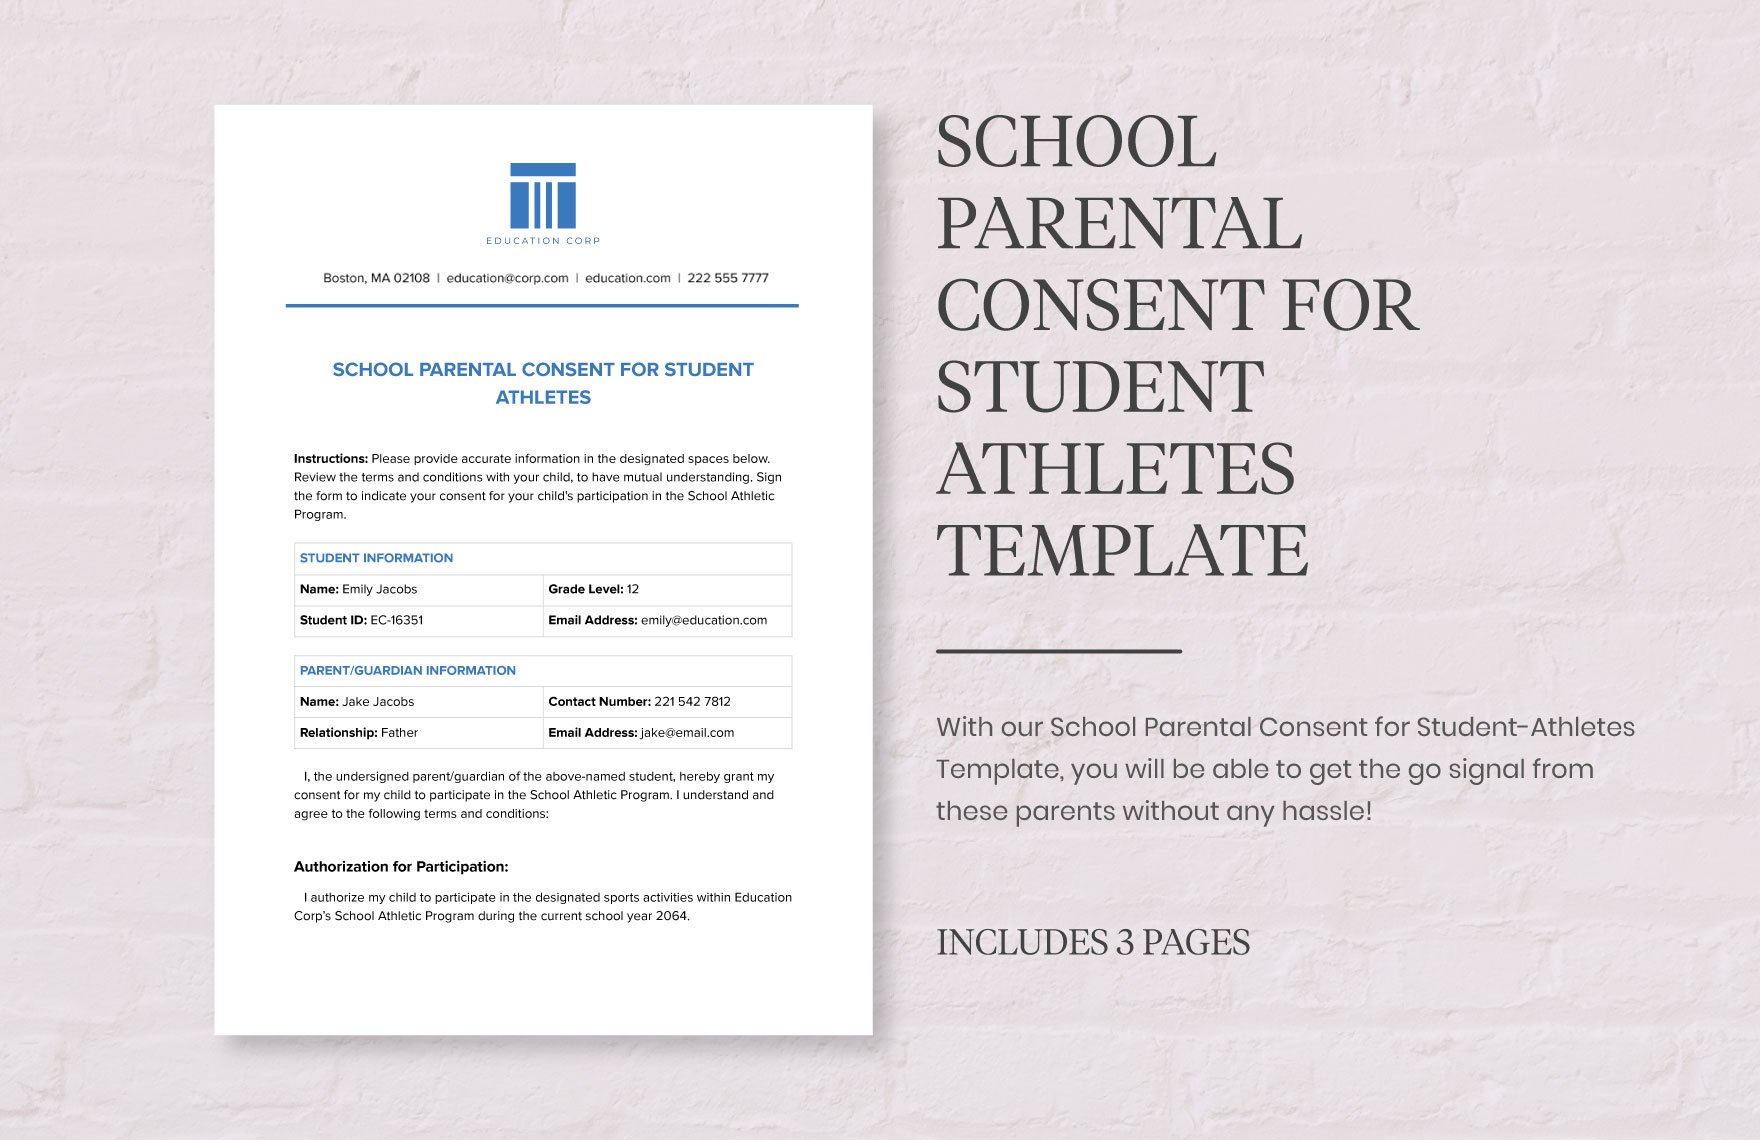  School Parental Consent for Student Athletes Template